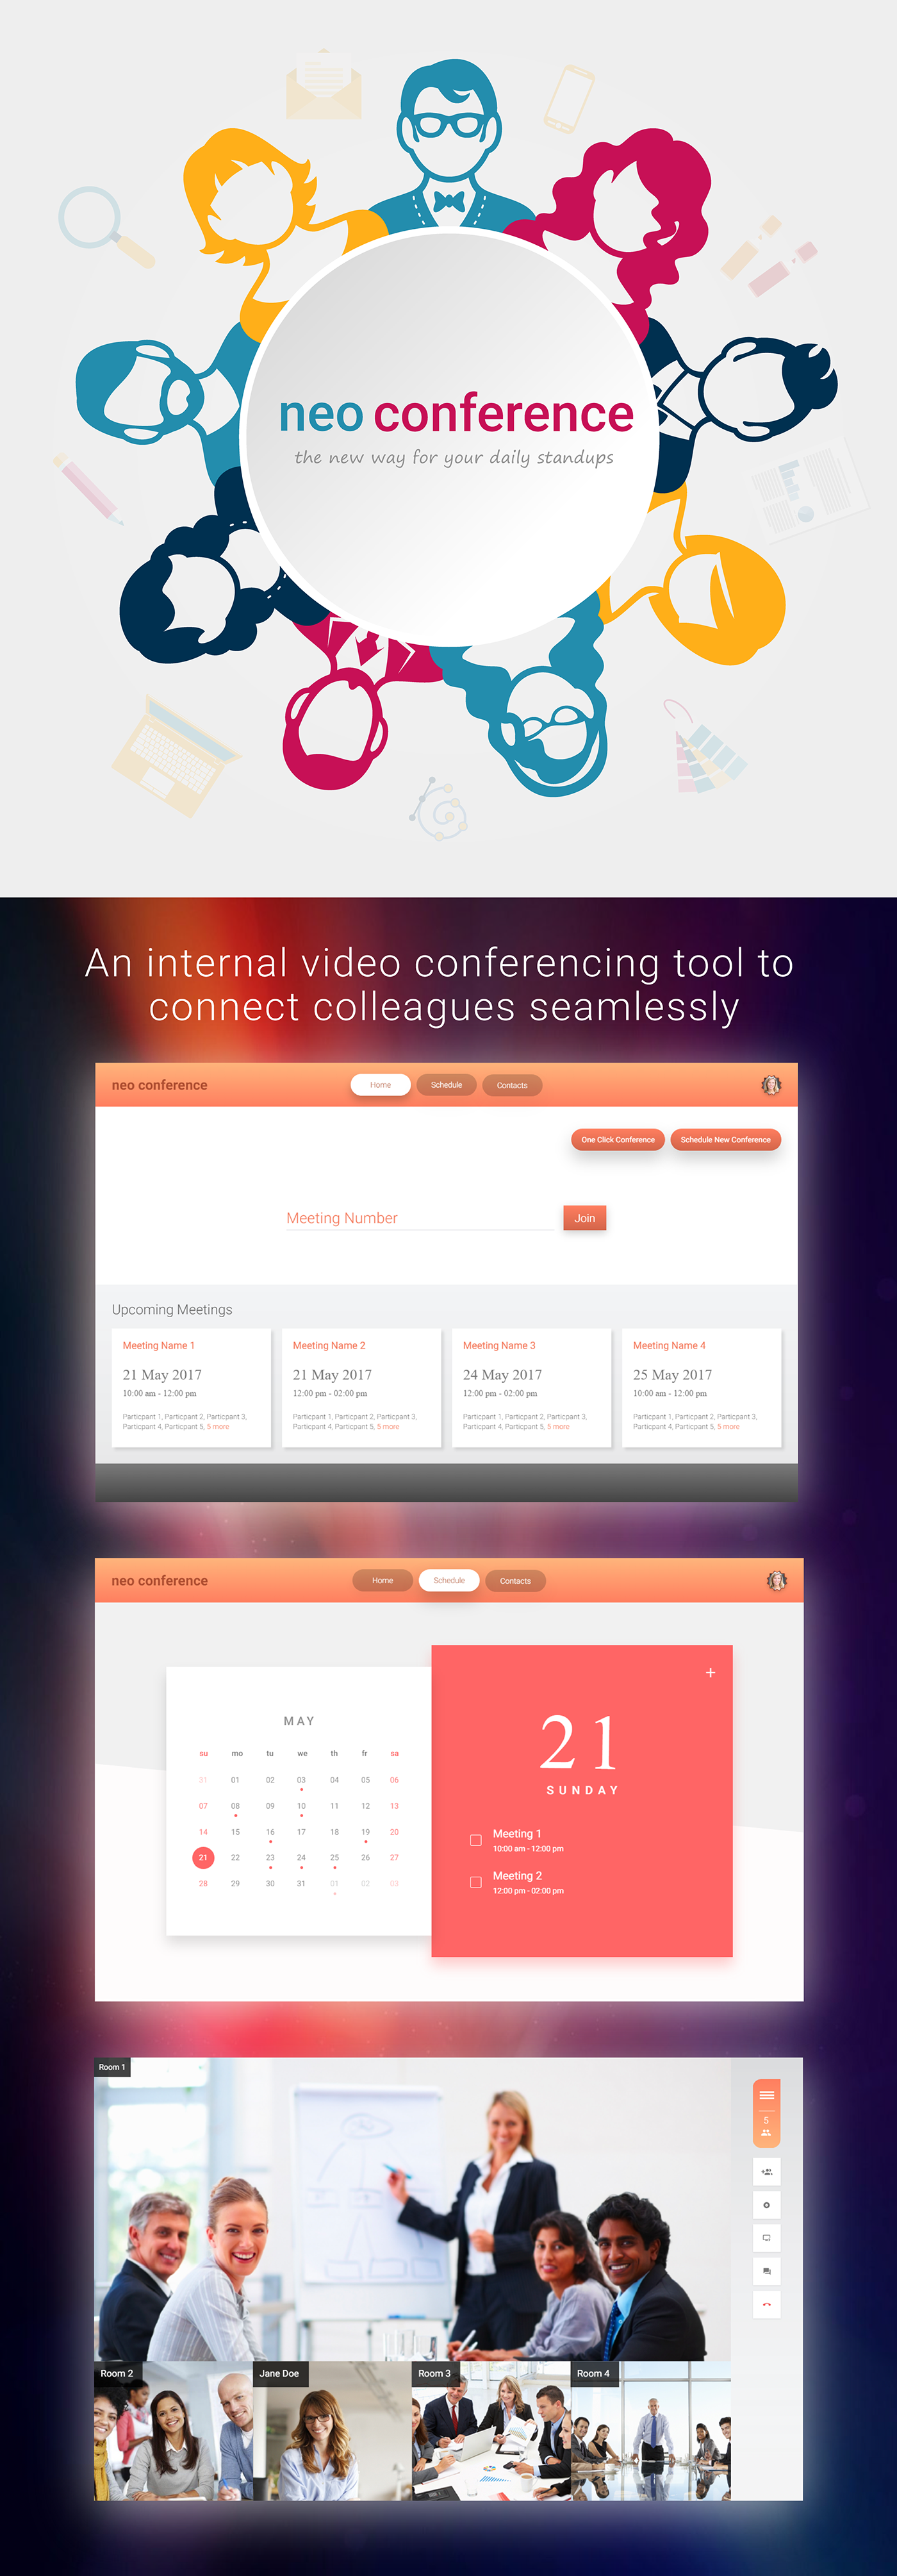 Unified Communications colloboration dashboard